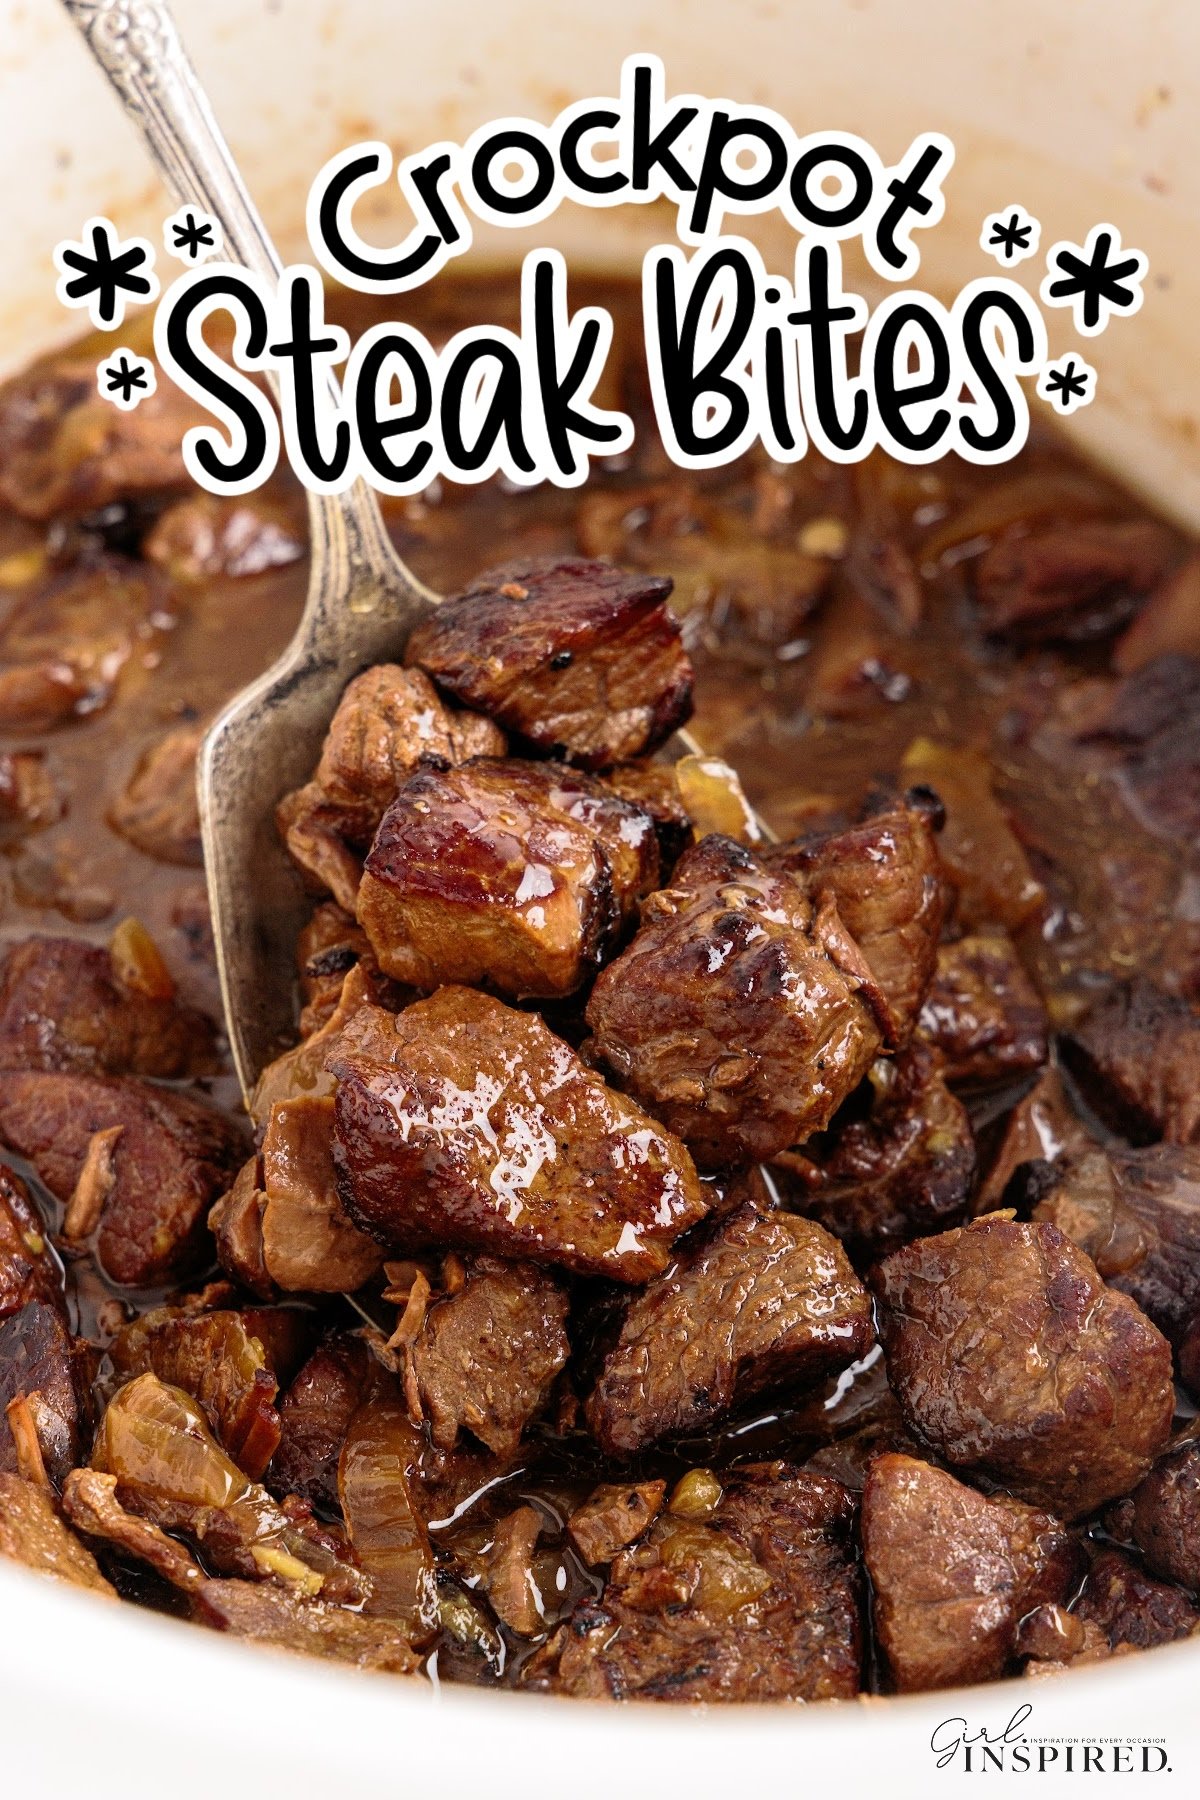 Spoon lifting cooked crockpot steak bites from crock, with text title overlay.